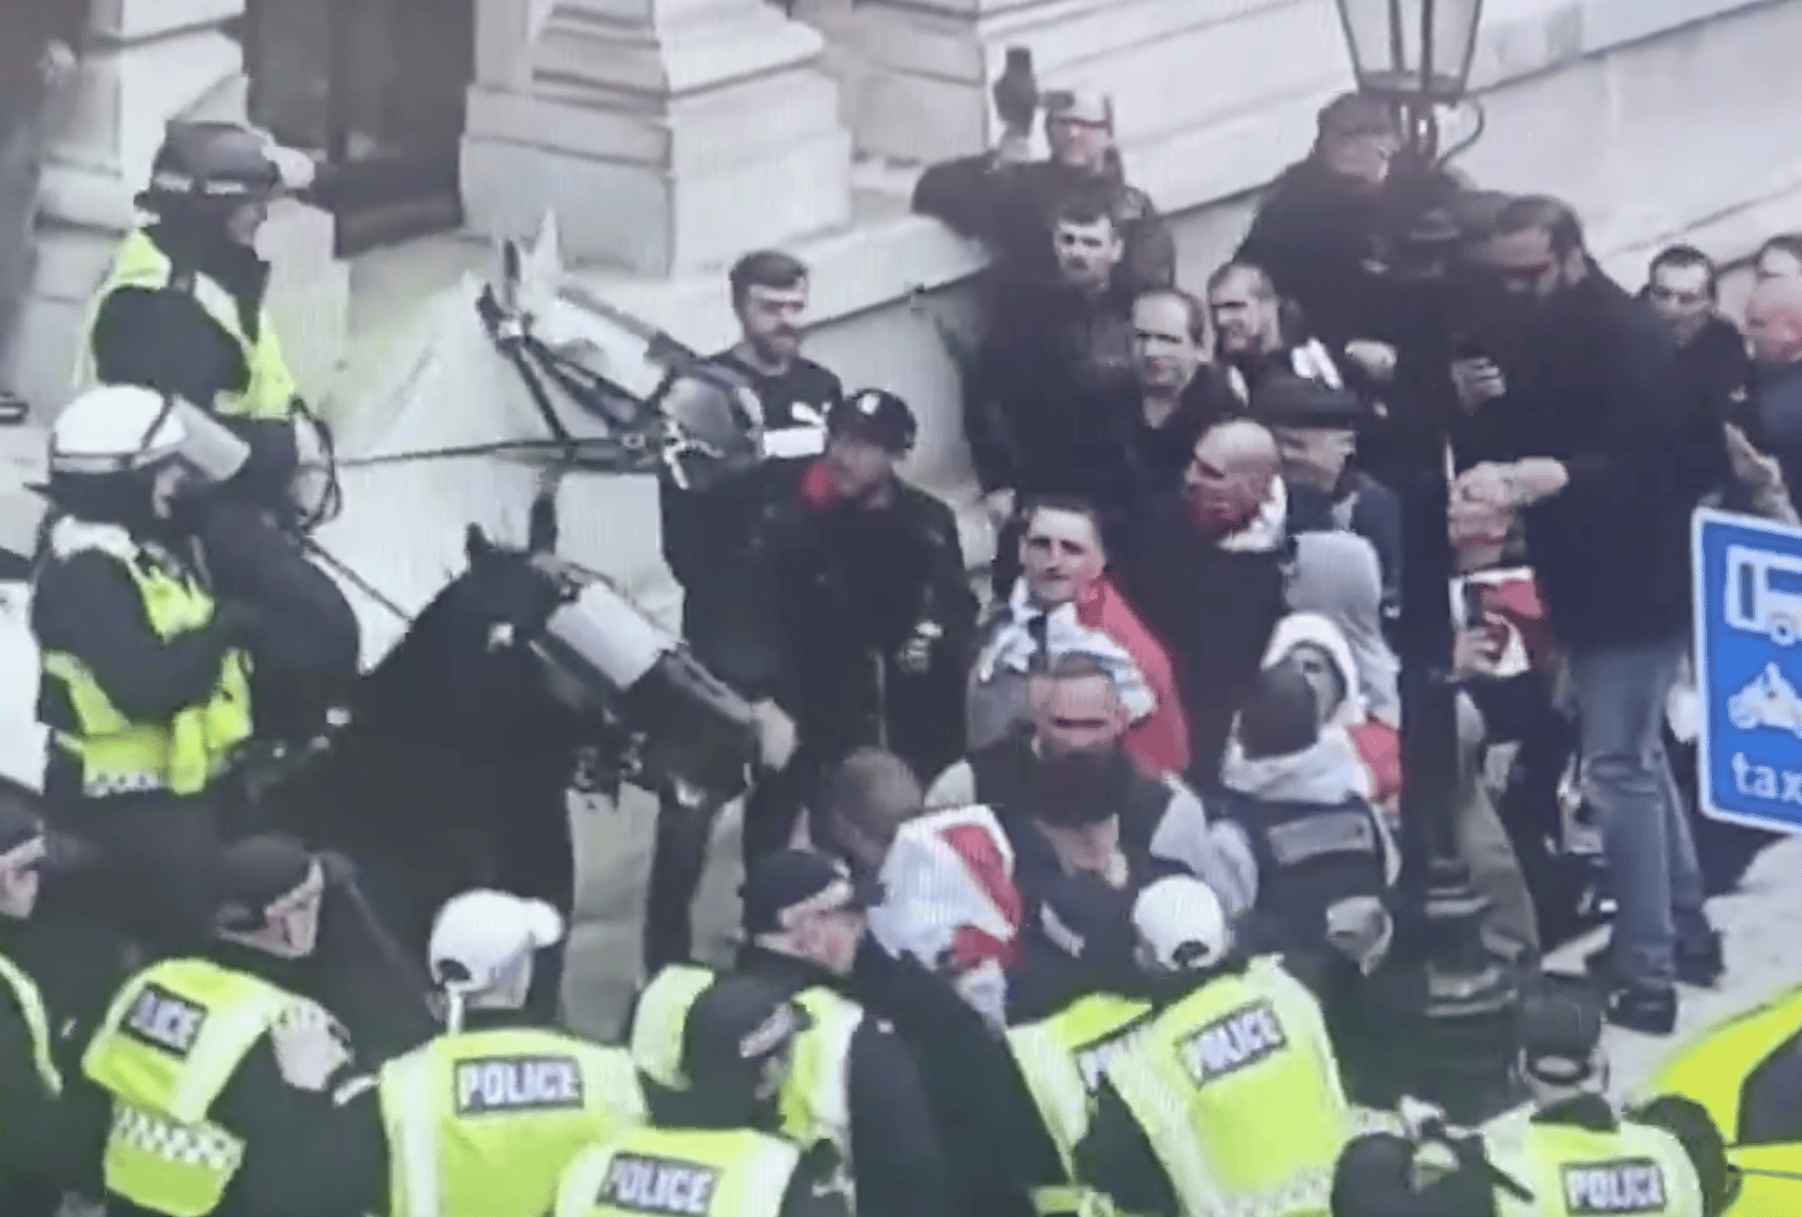 St George’s Day protestor attacks police horse with an umbrella